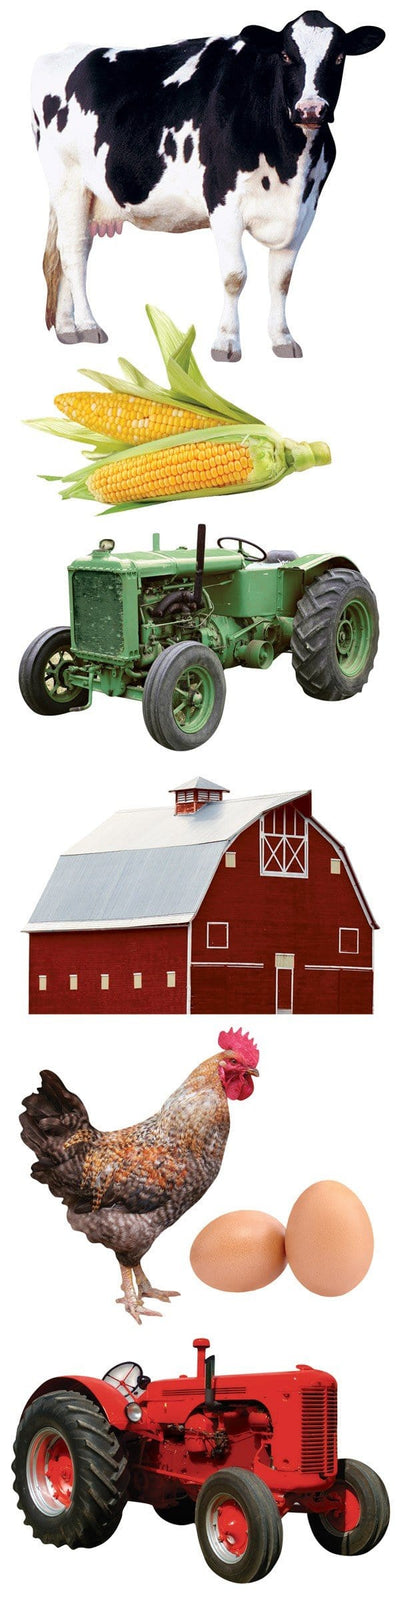 3D scrapbook stickers featuring photo real farm animals, a tractor, and a barn shown on a white background.